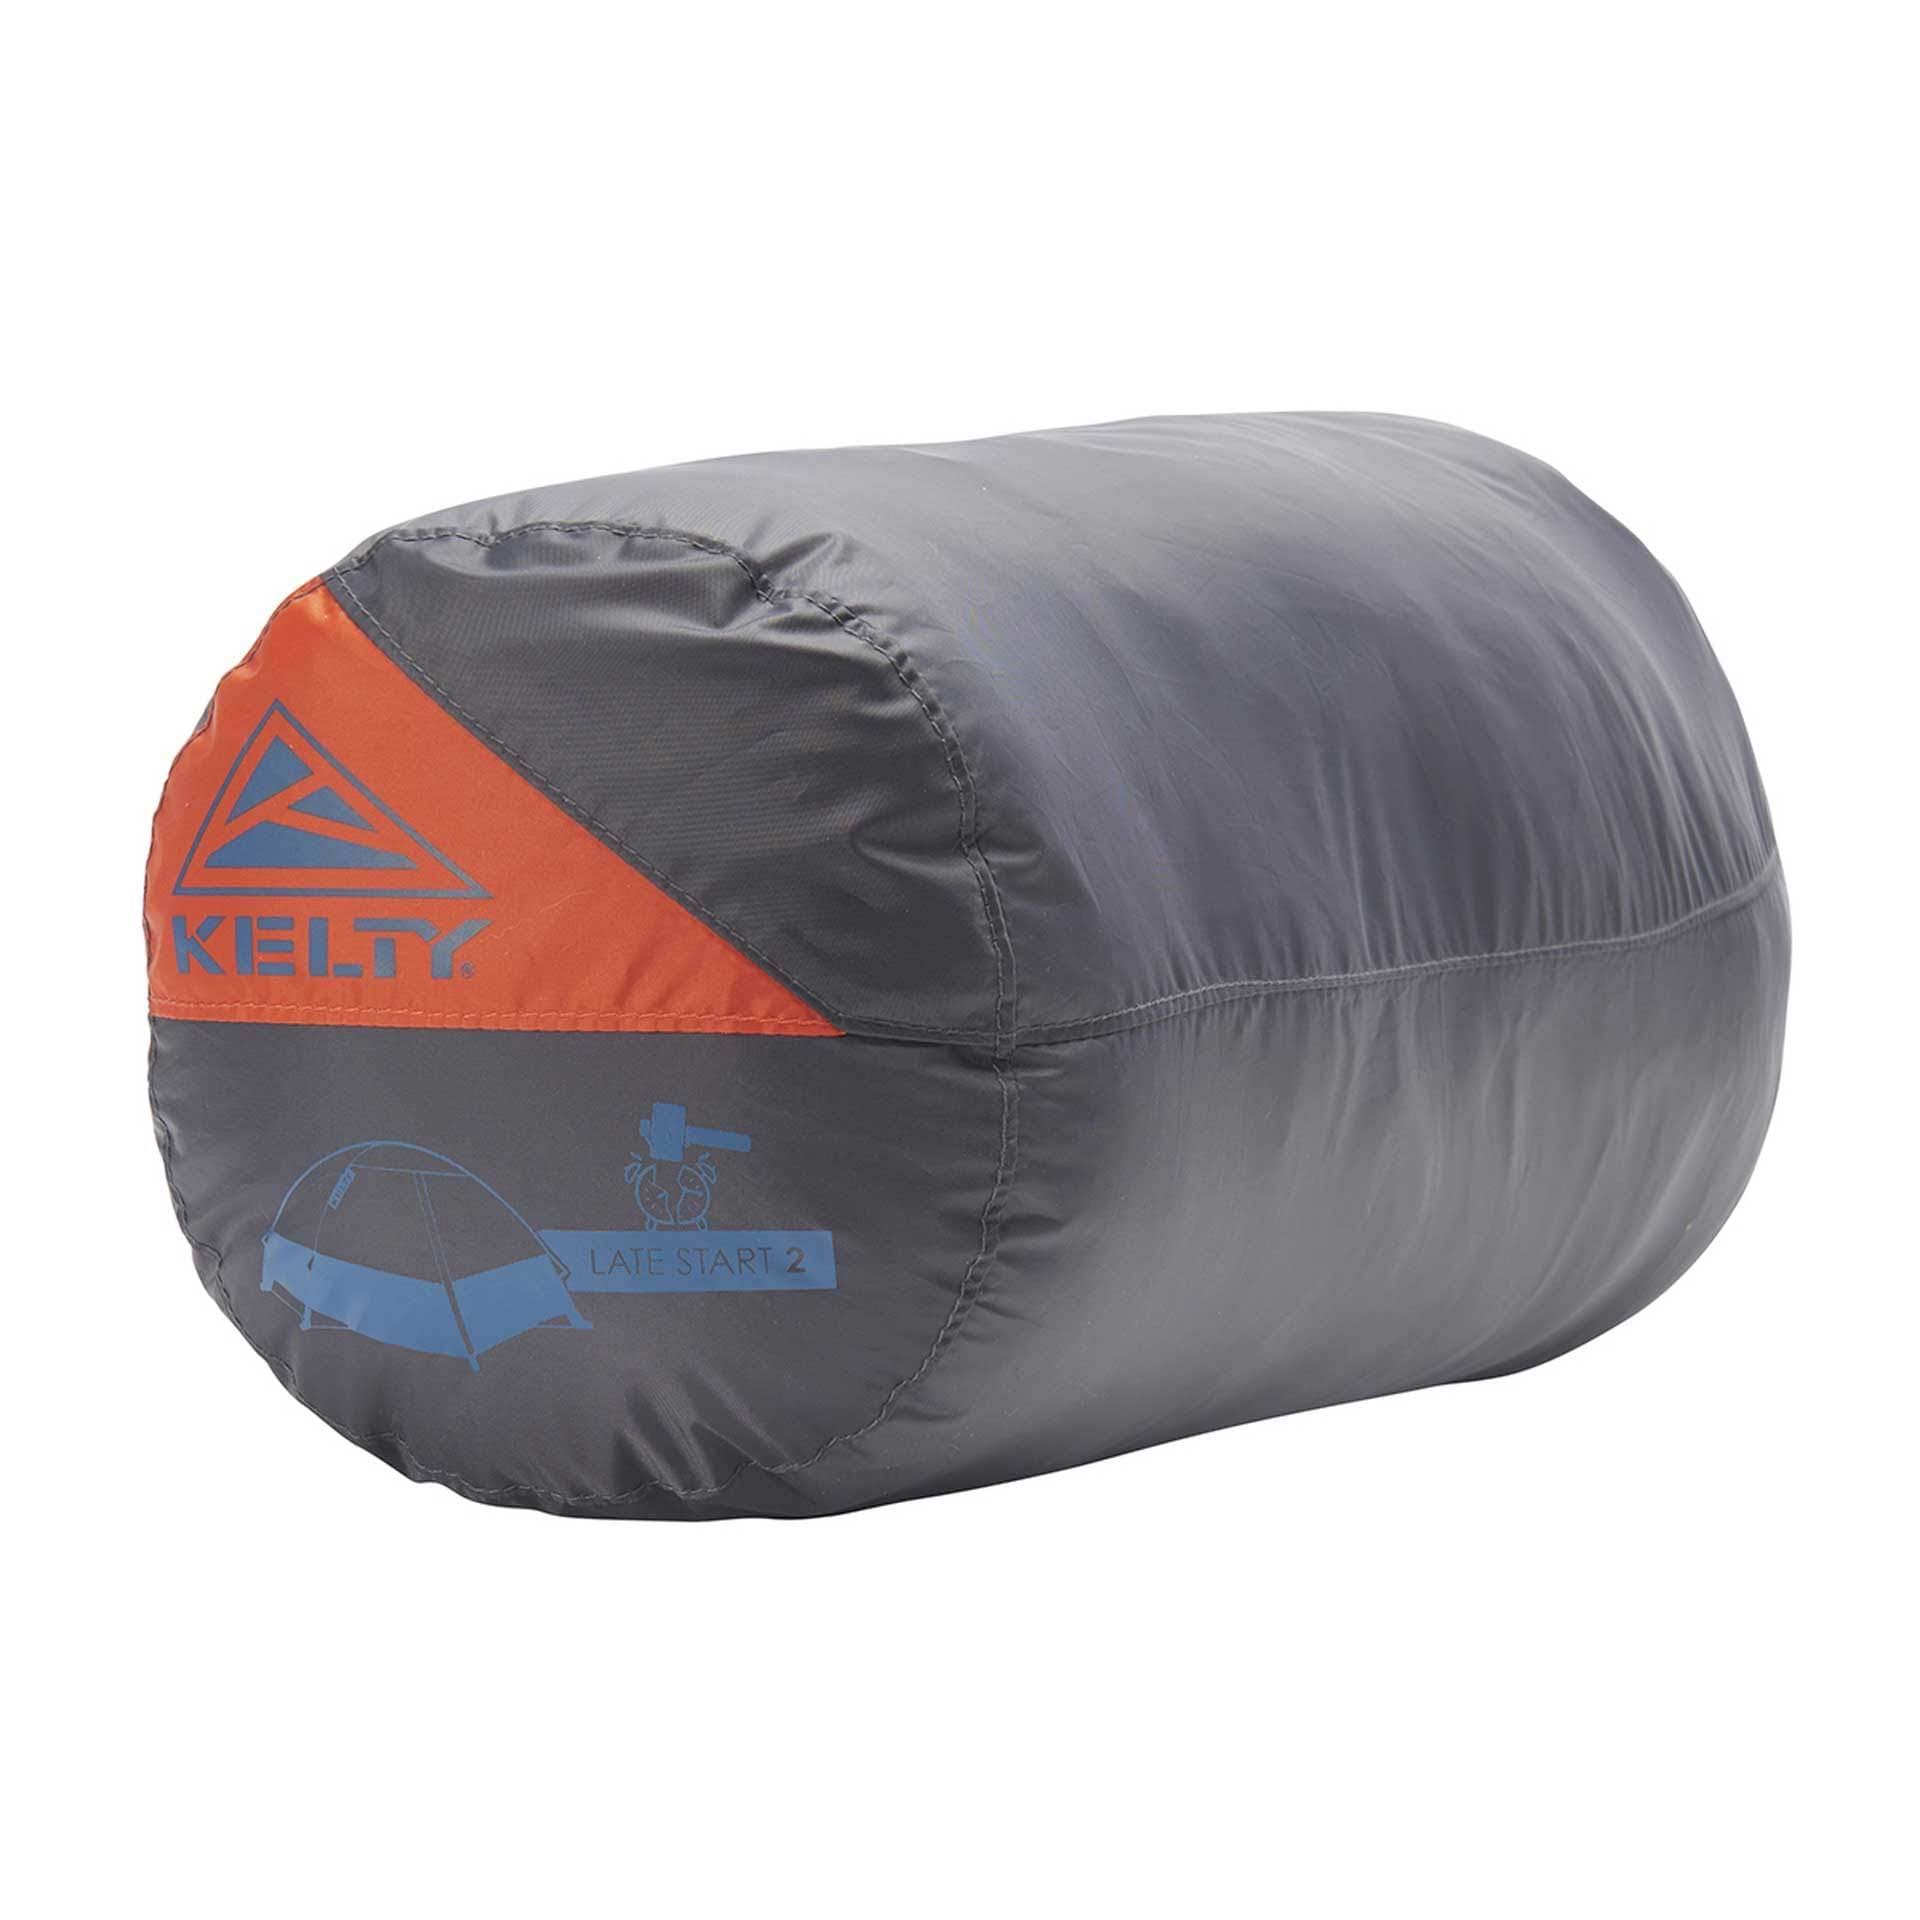 Kelty Late Start 2 Person Tent - ReRG